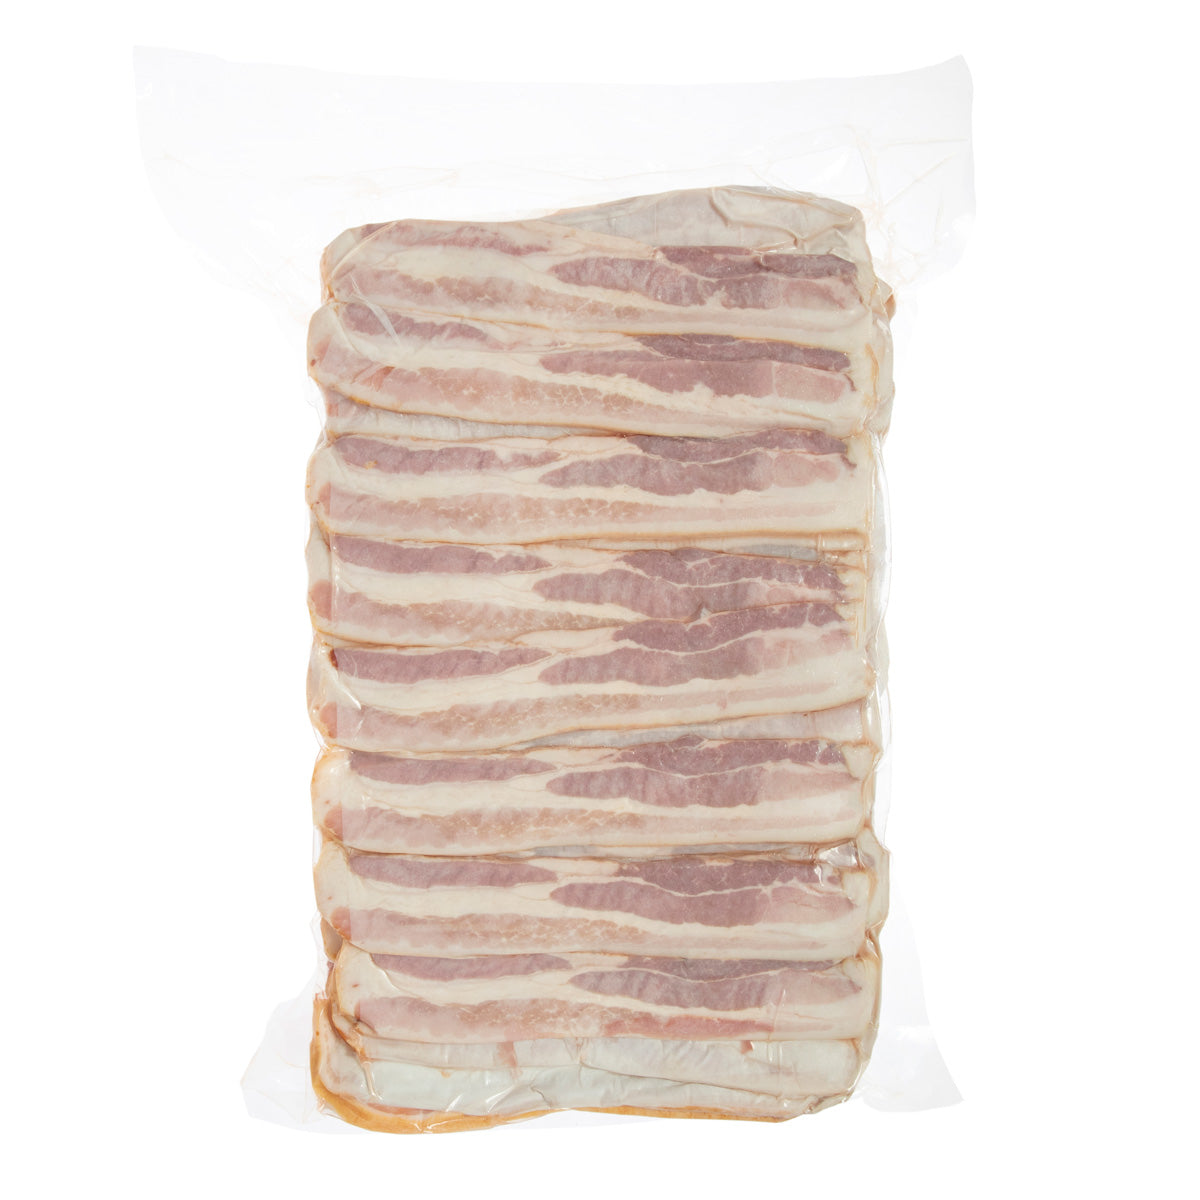 Compart Family Farms Layout Style Bacon 10-12 Sliced